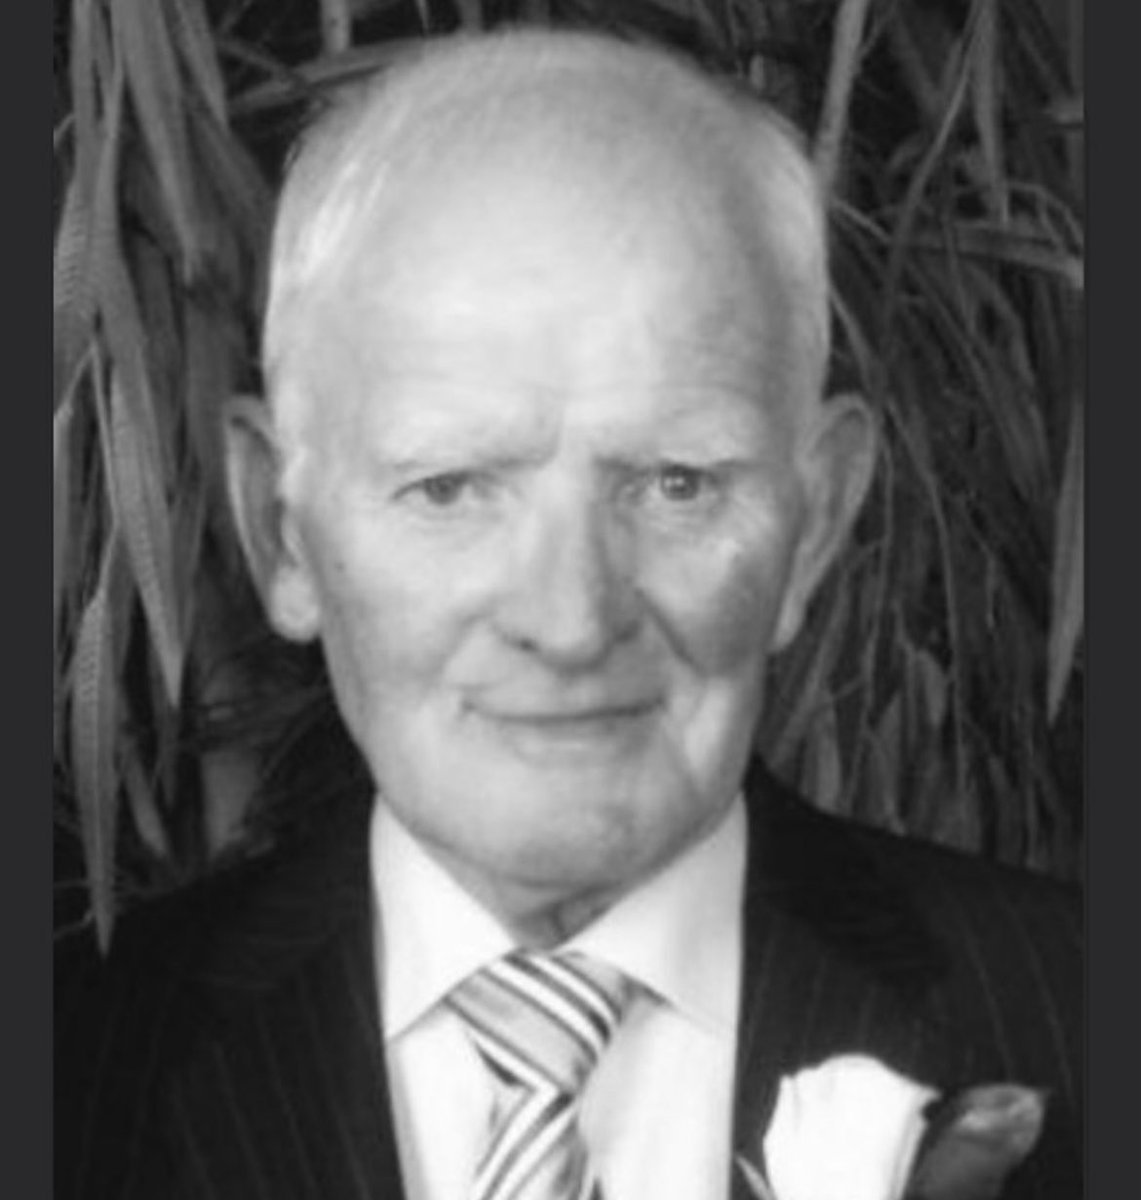 Castlegar GAA Club would like to offer their sincerest condolences to the family of the late Paddy Farragher. Paddy’s son Donnie helps out with the U8 girls and Paddy’s granddaughter Amelia also plays for our U8 camogie team. May Paddy’s gentle soul rest in peace.